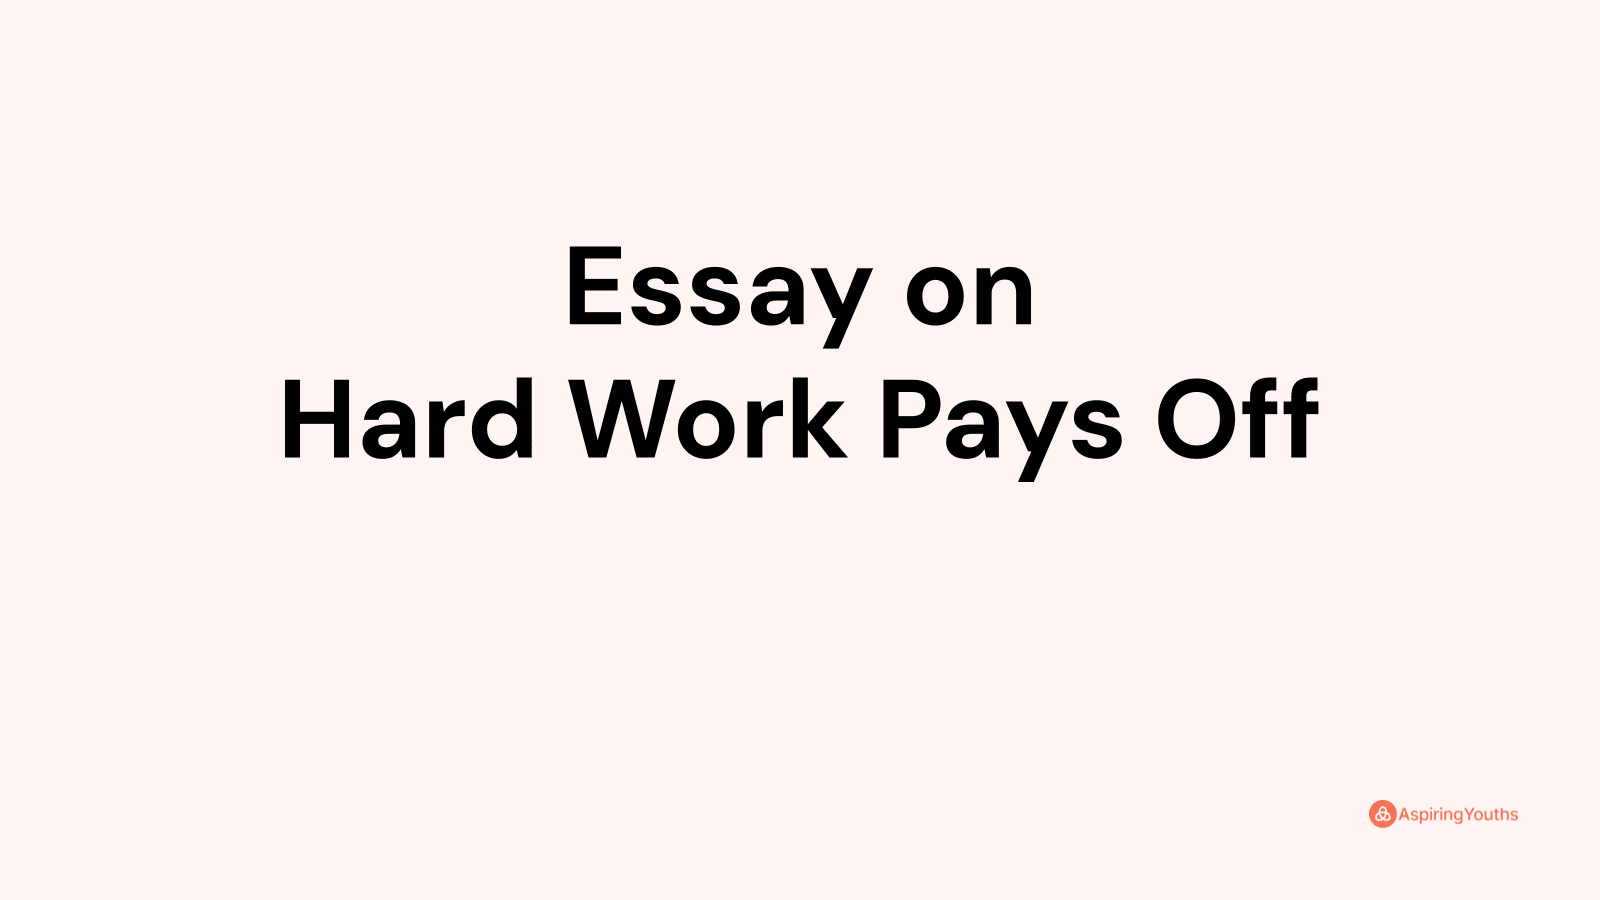 how hard work pays off essay